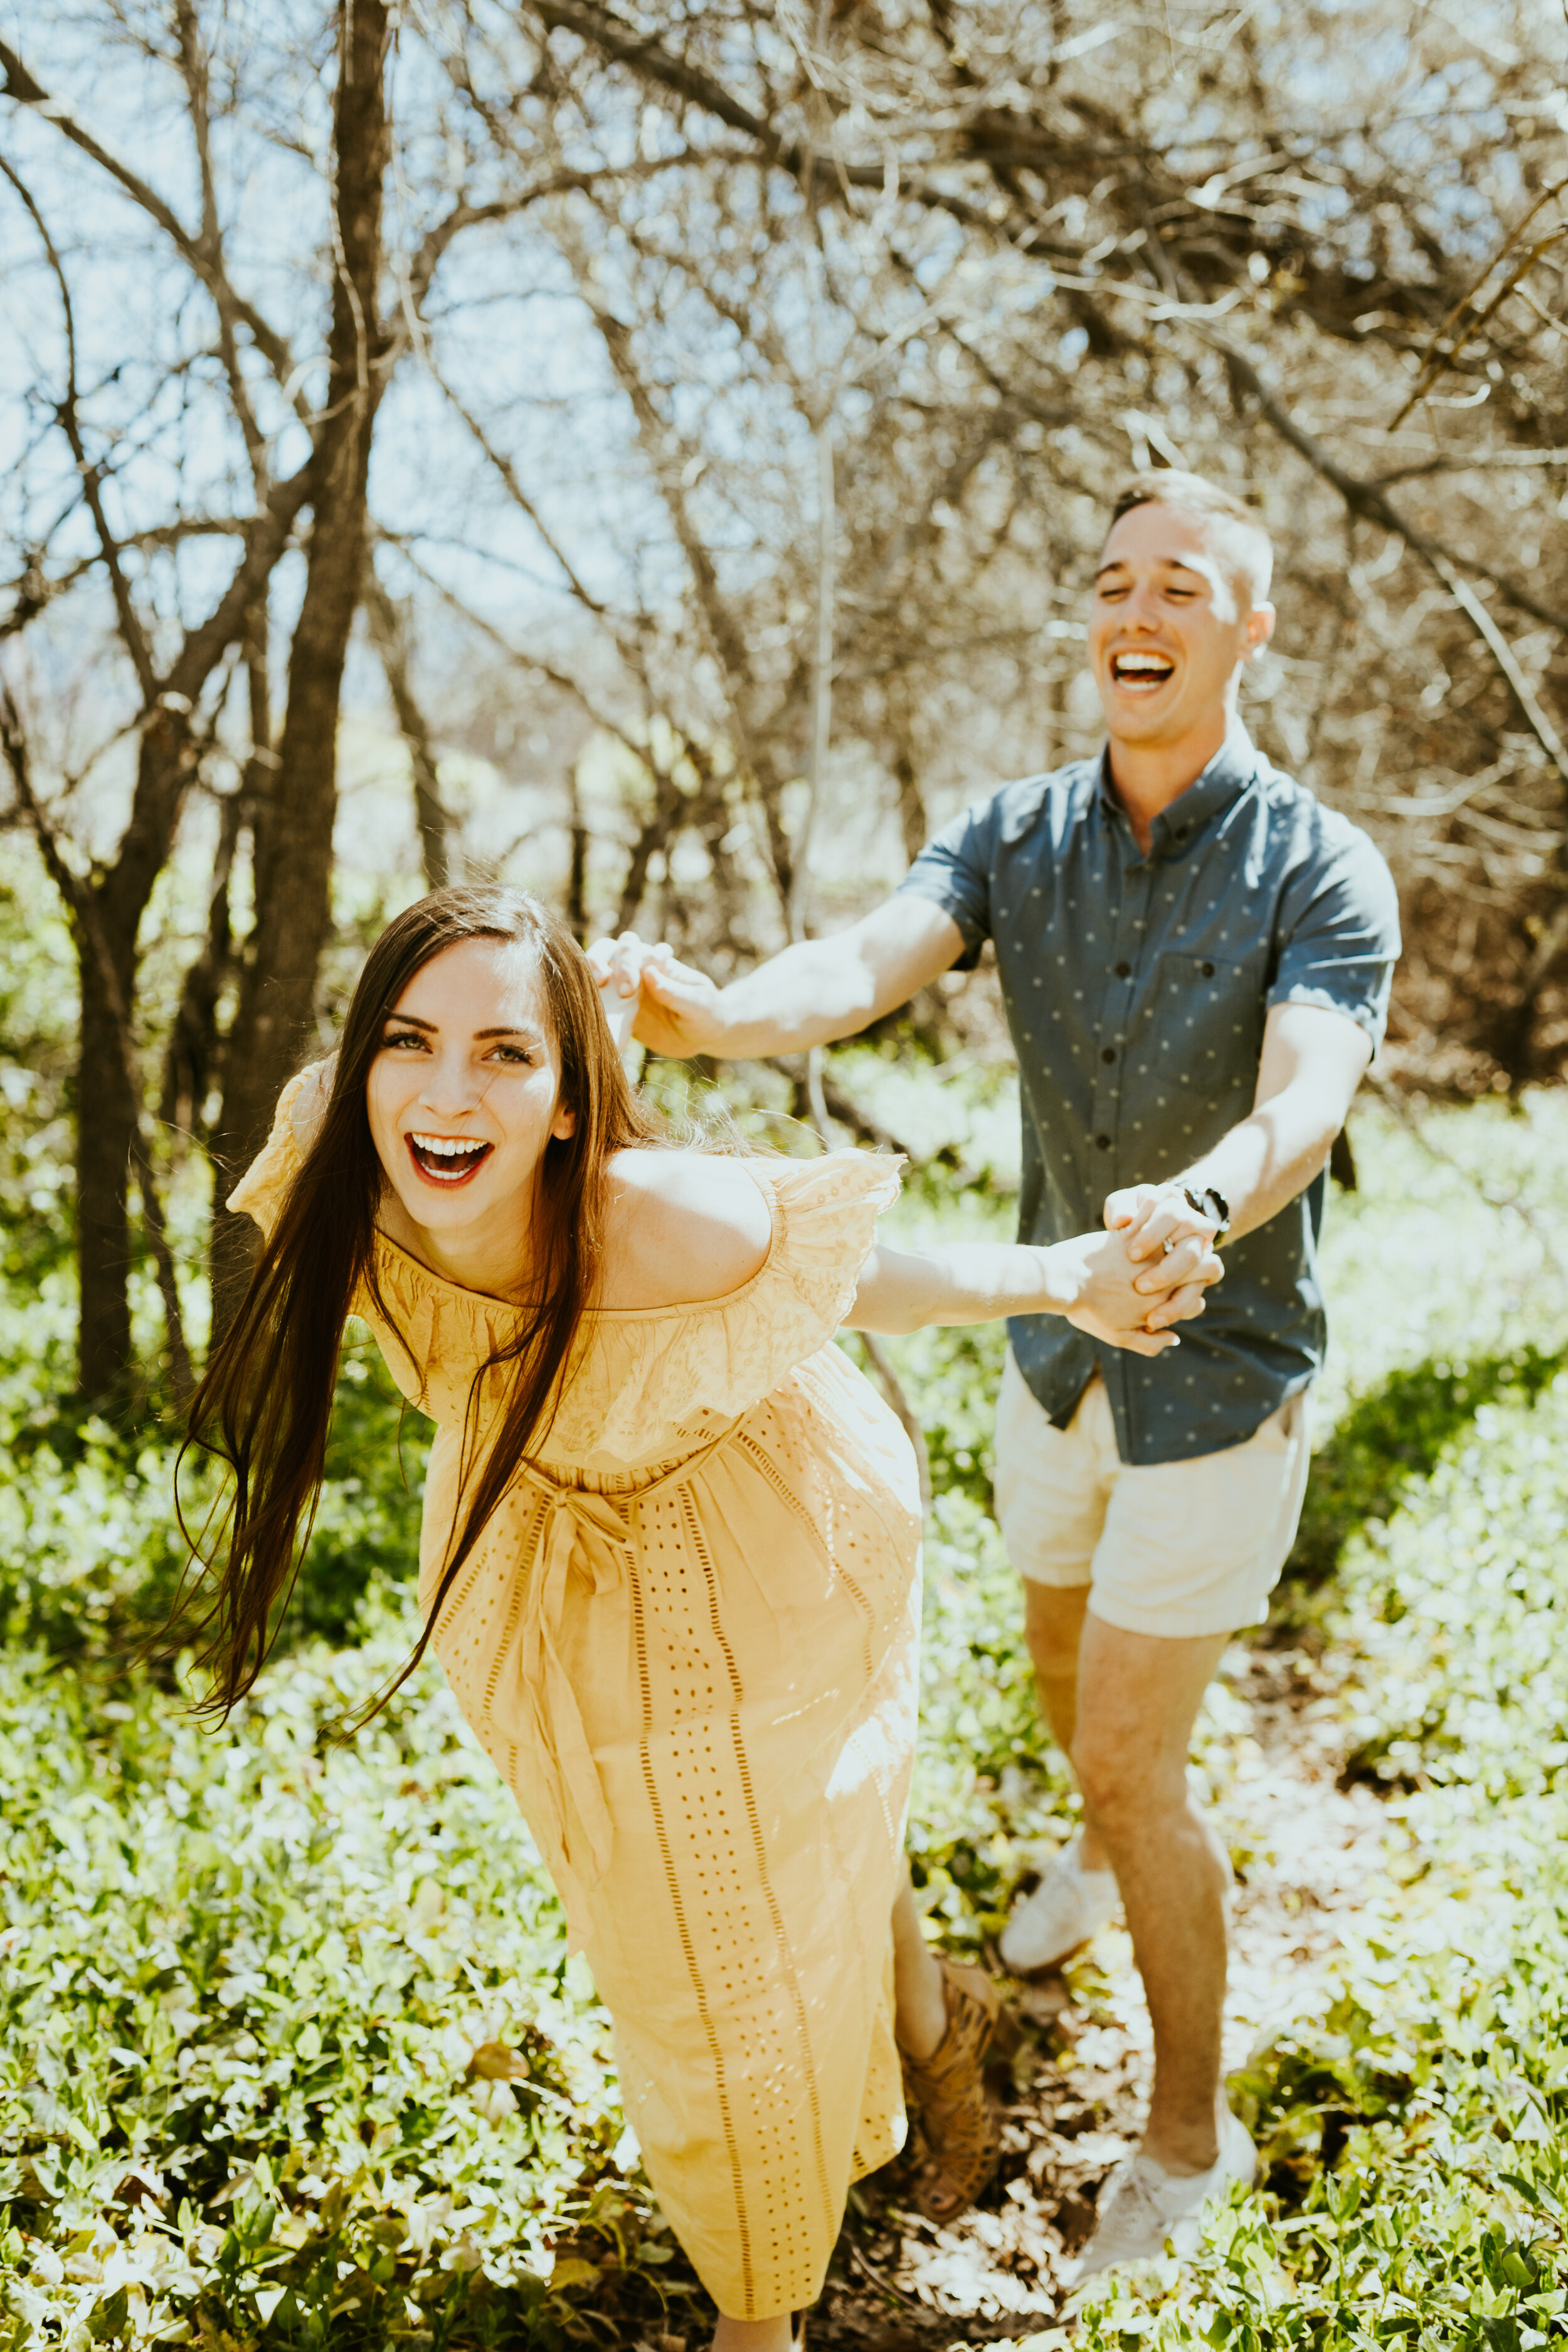 red rock crossing sedona arizona cathedral rock crescent moon ranch couple photos engagement photo outfit inspiration couple posing ideas midday photos anniversary photos-7.jpg